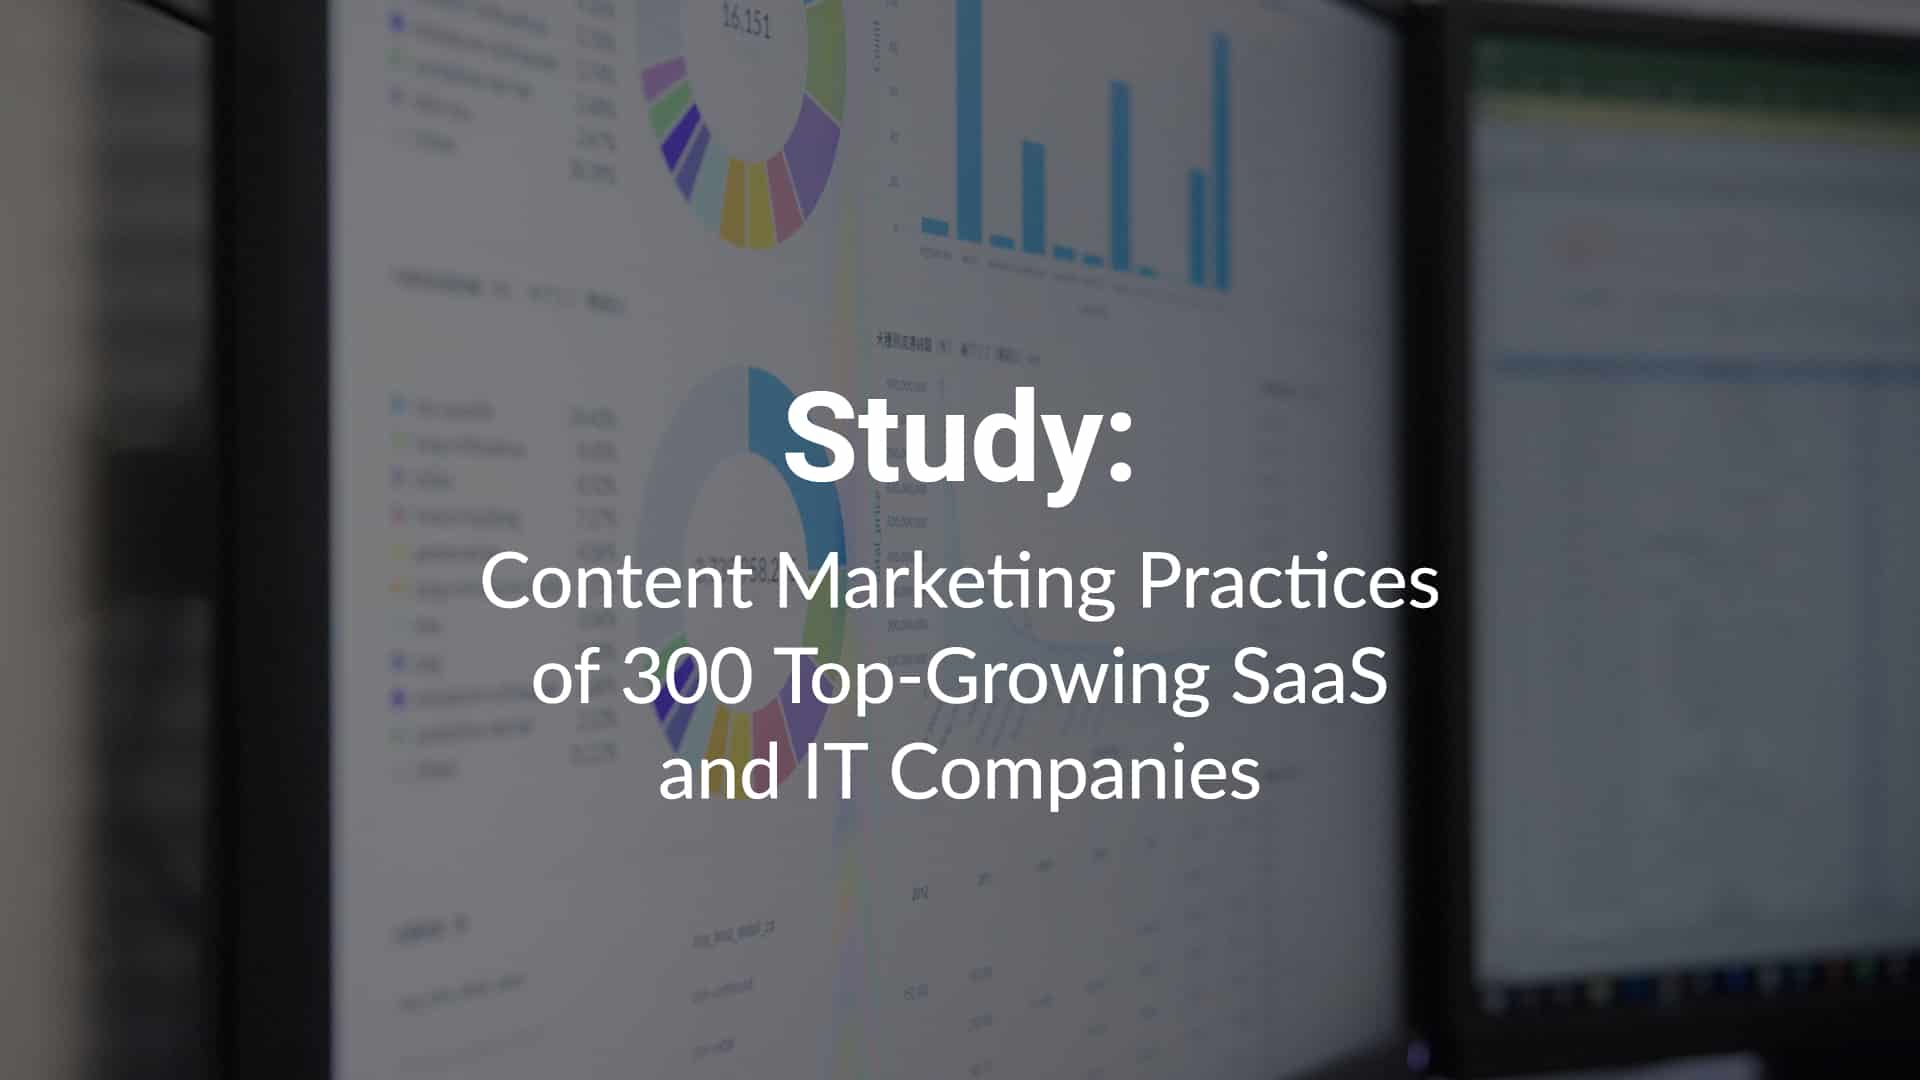 Tech company content study from Horizon Peak Consulting